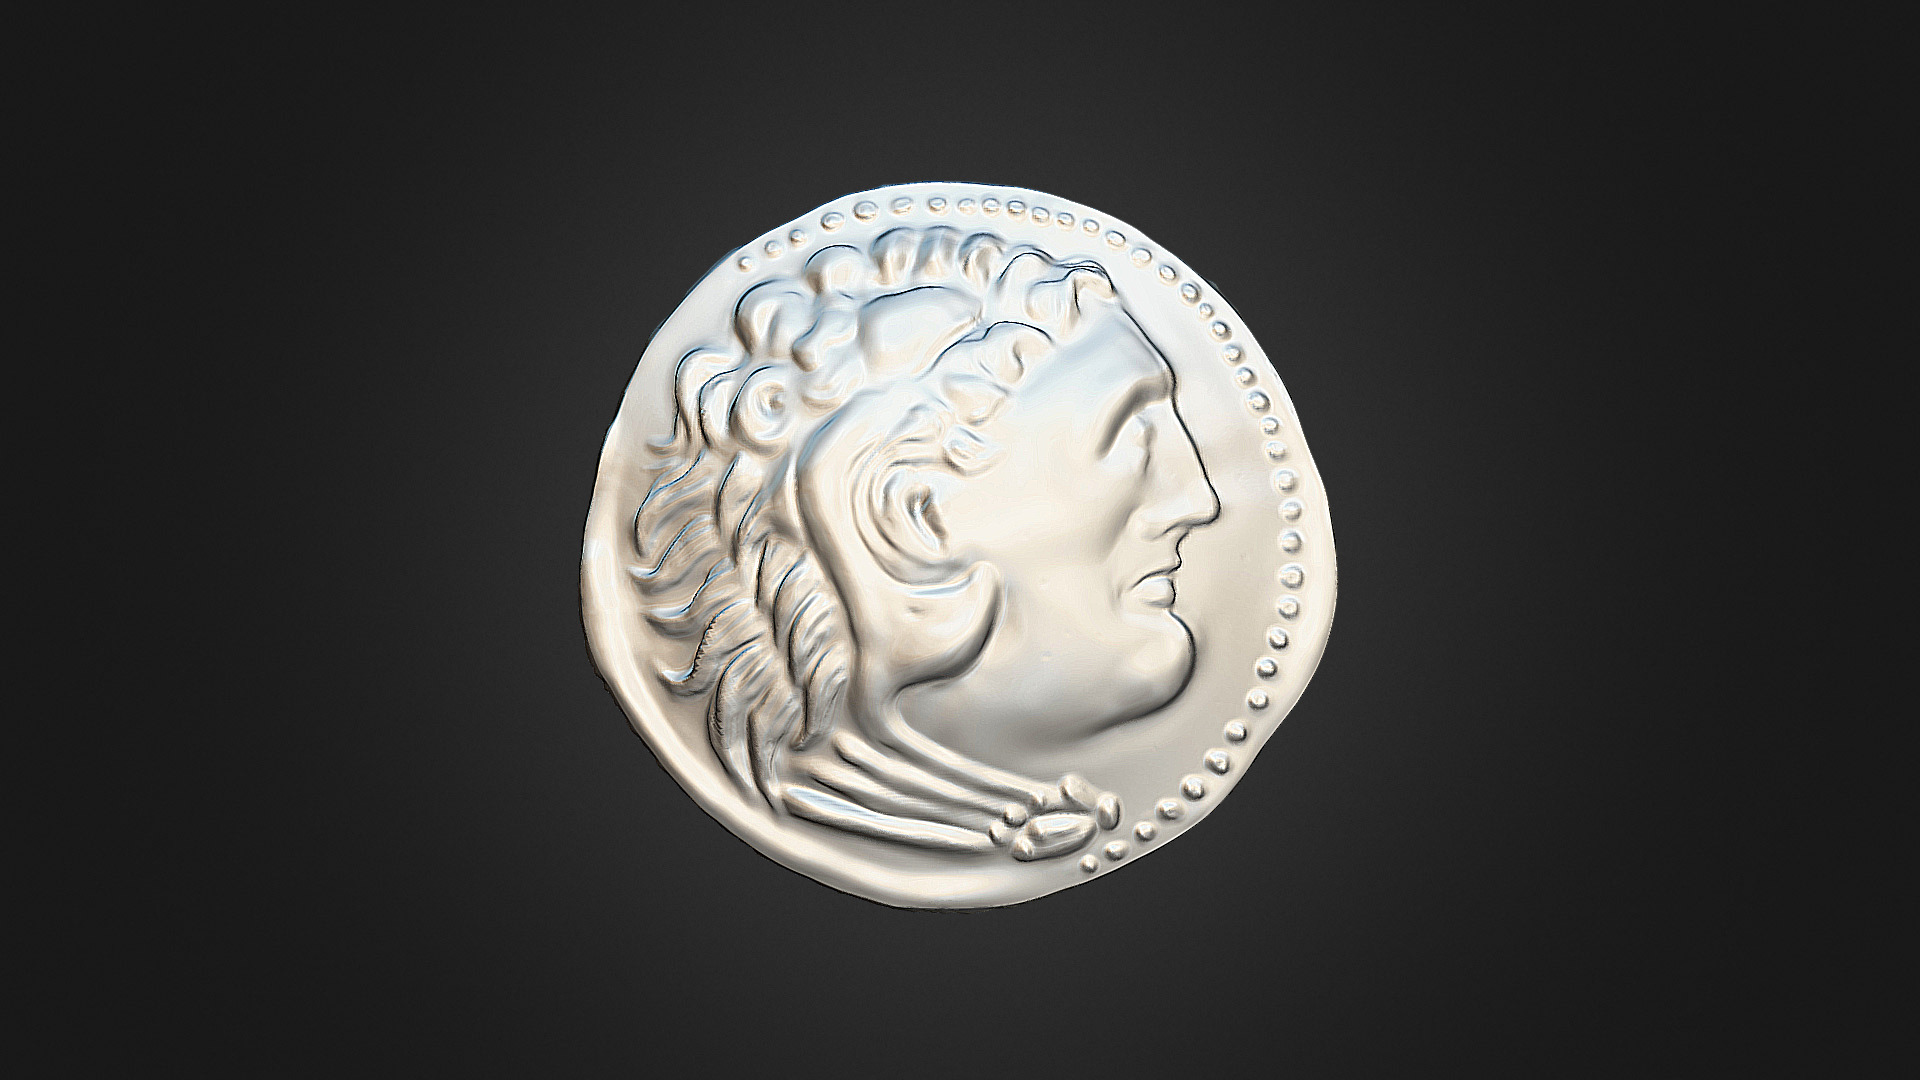 3D model Alexander the great coin - This is a 3D model of the Alexander the great coin. The 3D model is about a blue and white globe.